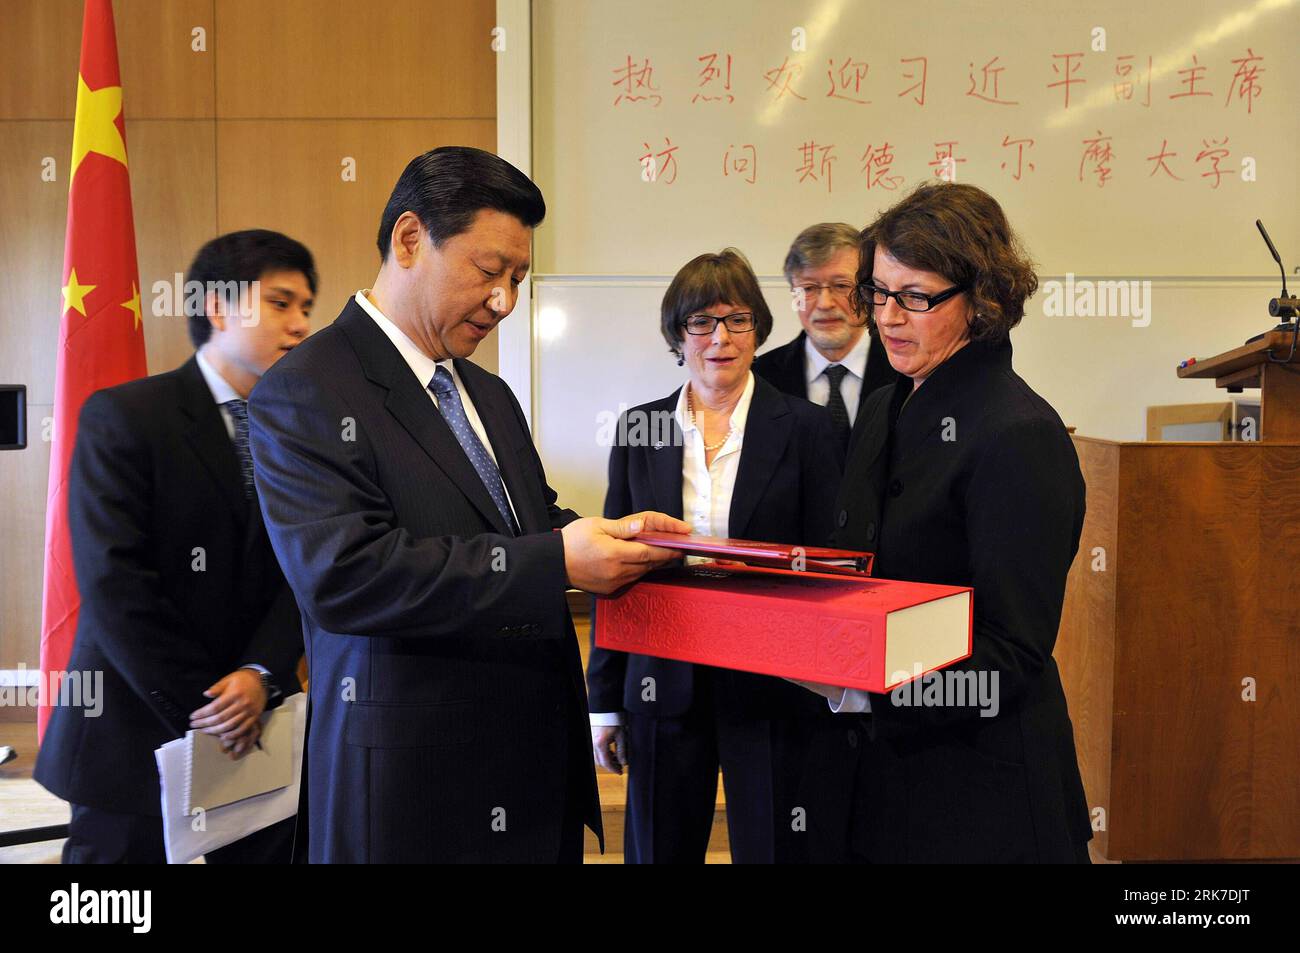 Bildnummer: 53903724  Datum: 30.03.2010  Copyright: imago/Xinhua (100330) -- STOCKHOLM, March 30, 2010 (Xinhua) -- Chinese Vice President Xi Jinping (L Front) sends digital book as a gift while visiting Nordic Confucius Institute of Stockholm University in Stockholm, Sweden, March 30, 2010. (Xinhua/Wu Wei) (zl) (4)SWEDEN-CHINA-XI JINPING-VISIT PUBLICATIONxNOTxINxCHN People Politik kbdig xsk 2010 quer     Bildnummer 53903724 Date 30 03 2010 Copyright Imago XINHUA  Stockholm March 30 2010 XINHUA Chinese Vice President Xi Jinping l Front sends Digital Book As a Poison while Visiting Nordic Confuc Stock Photo